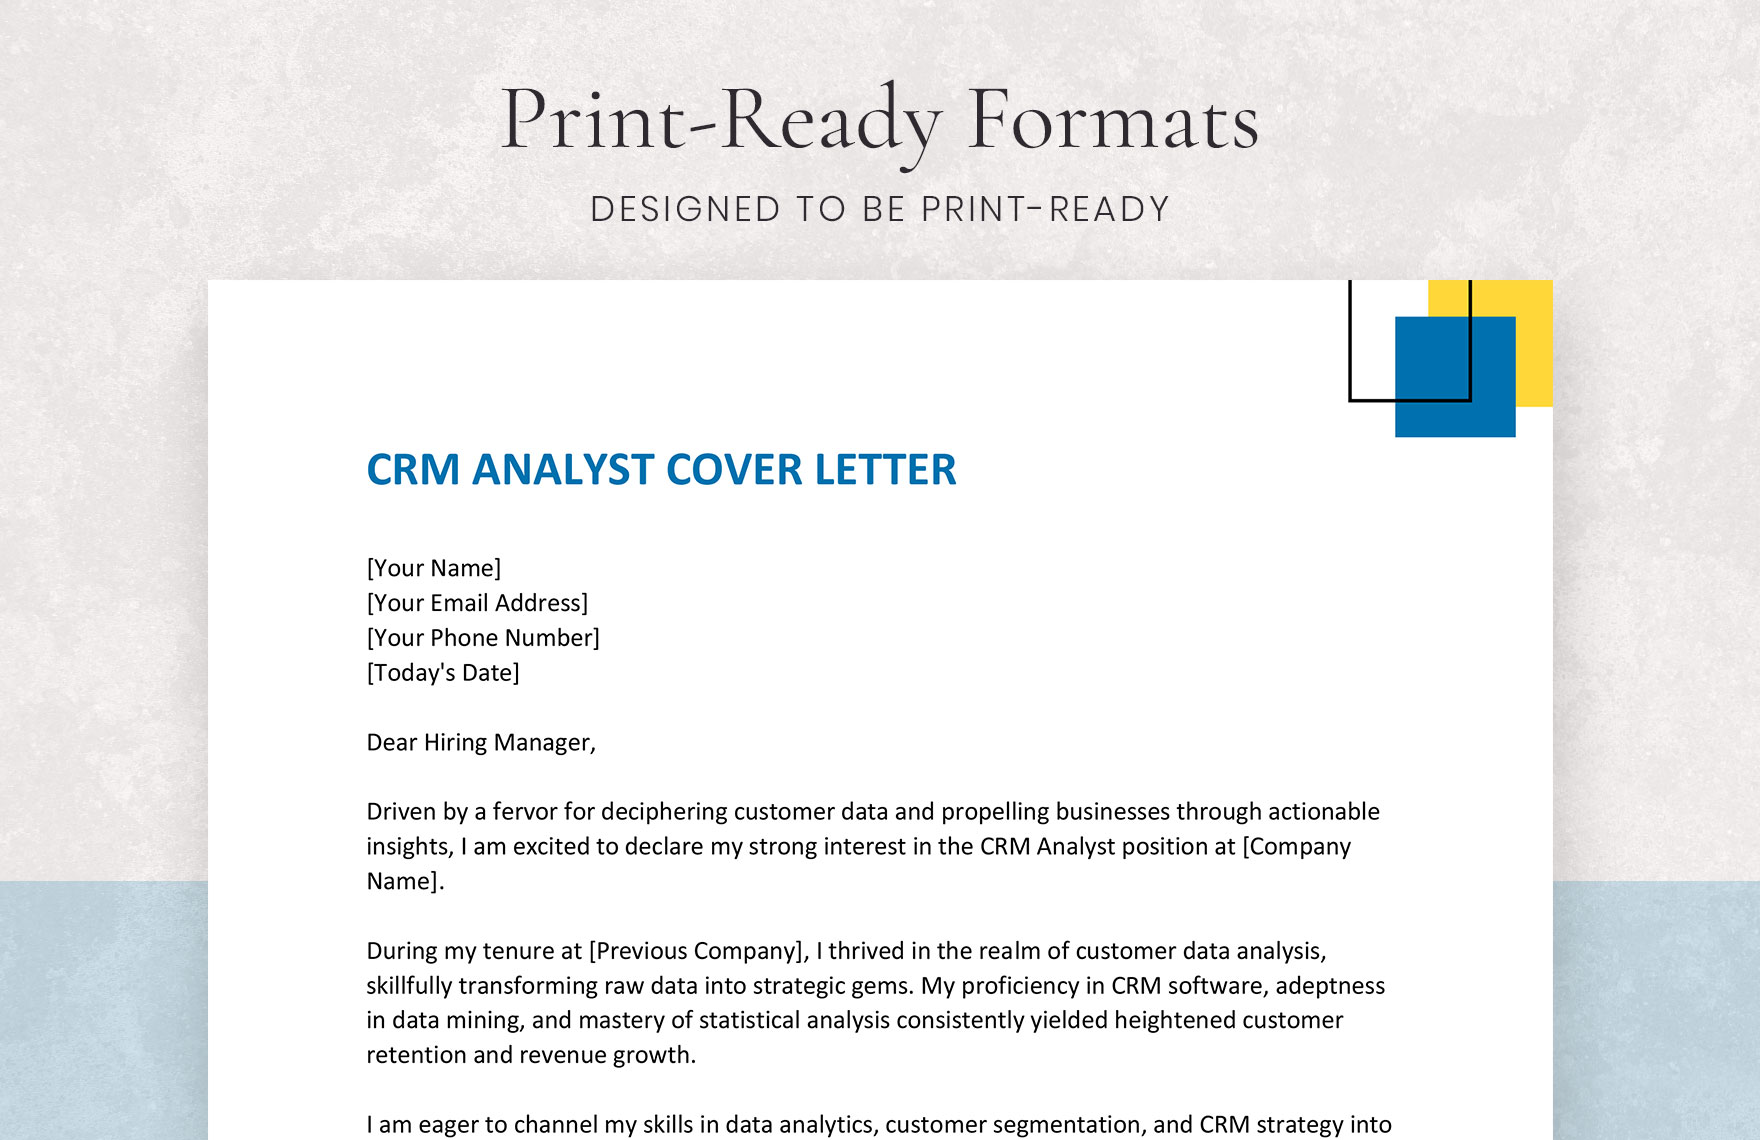 CRM Analyst Cover Letter